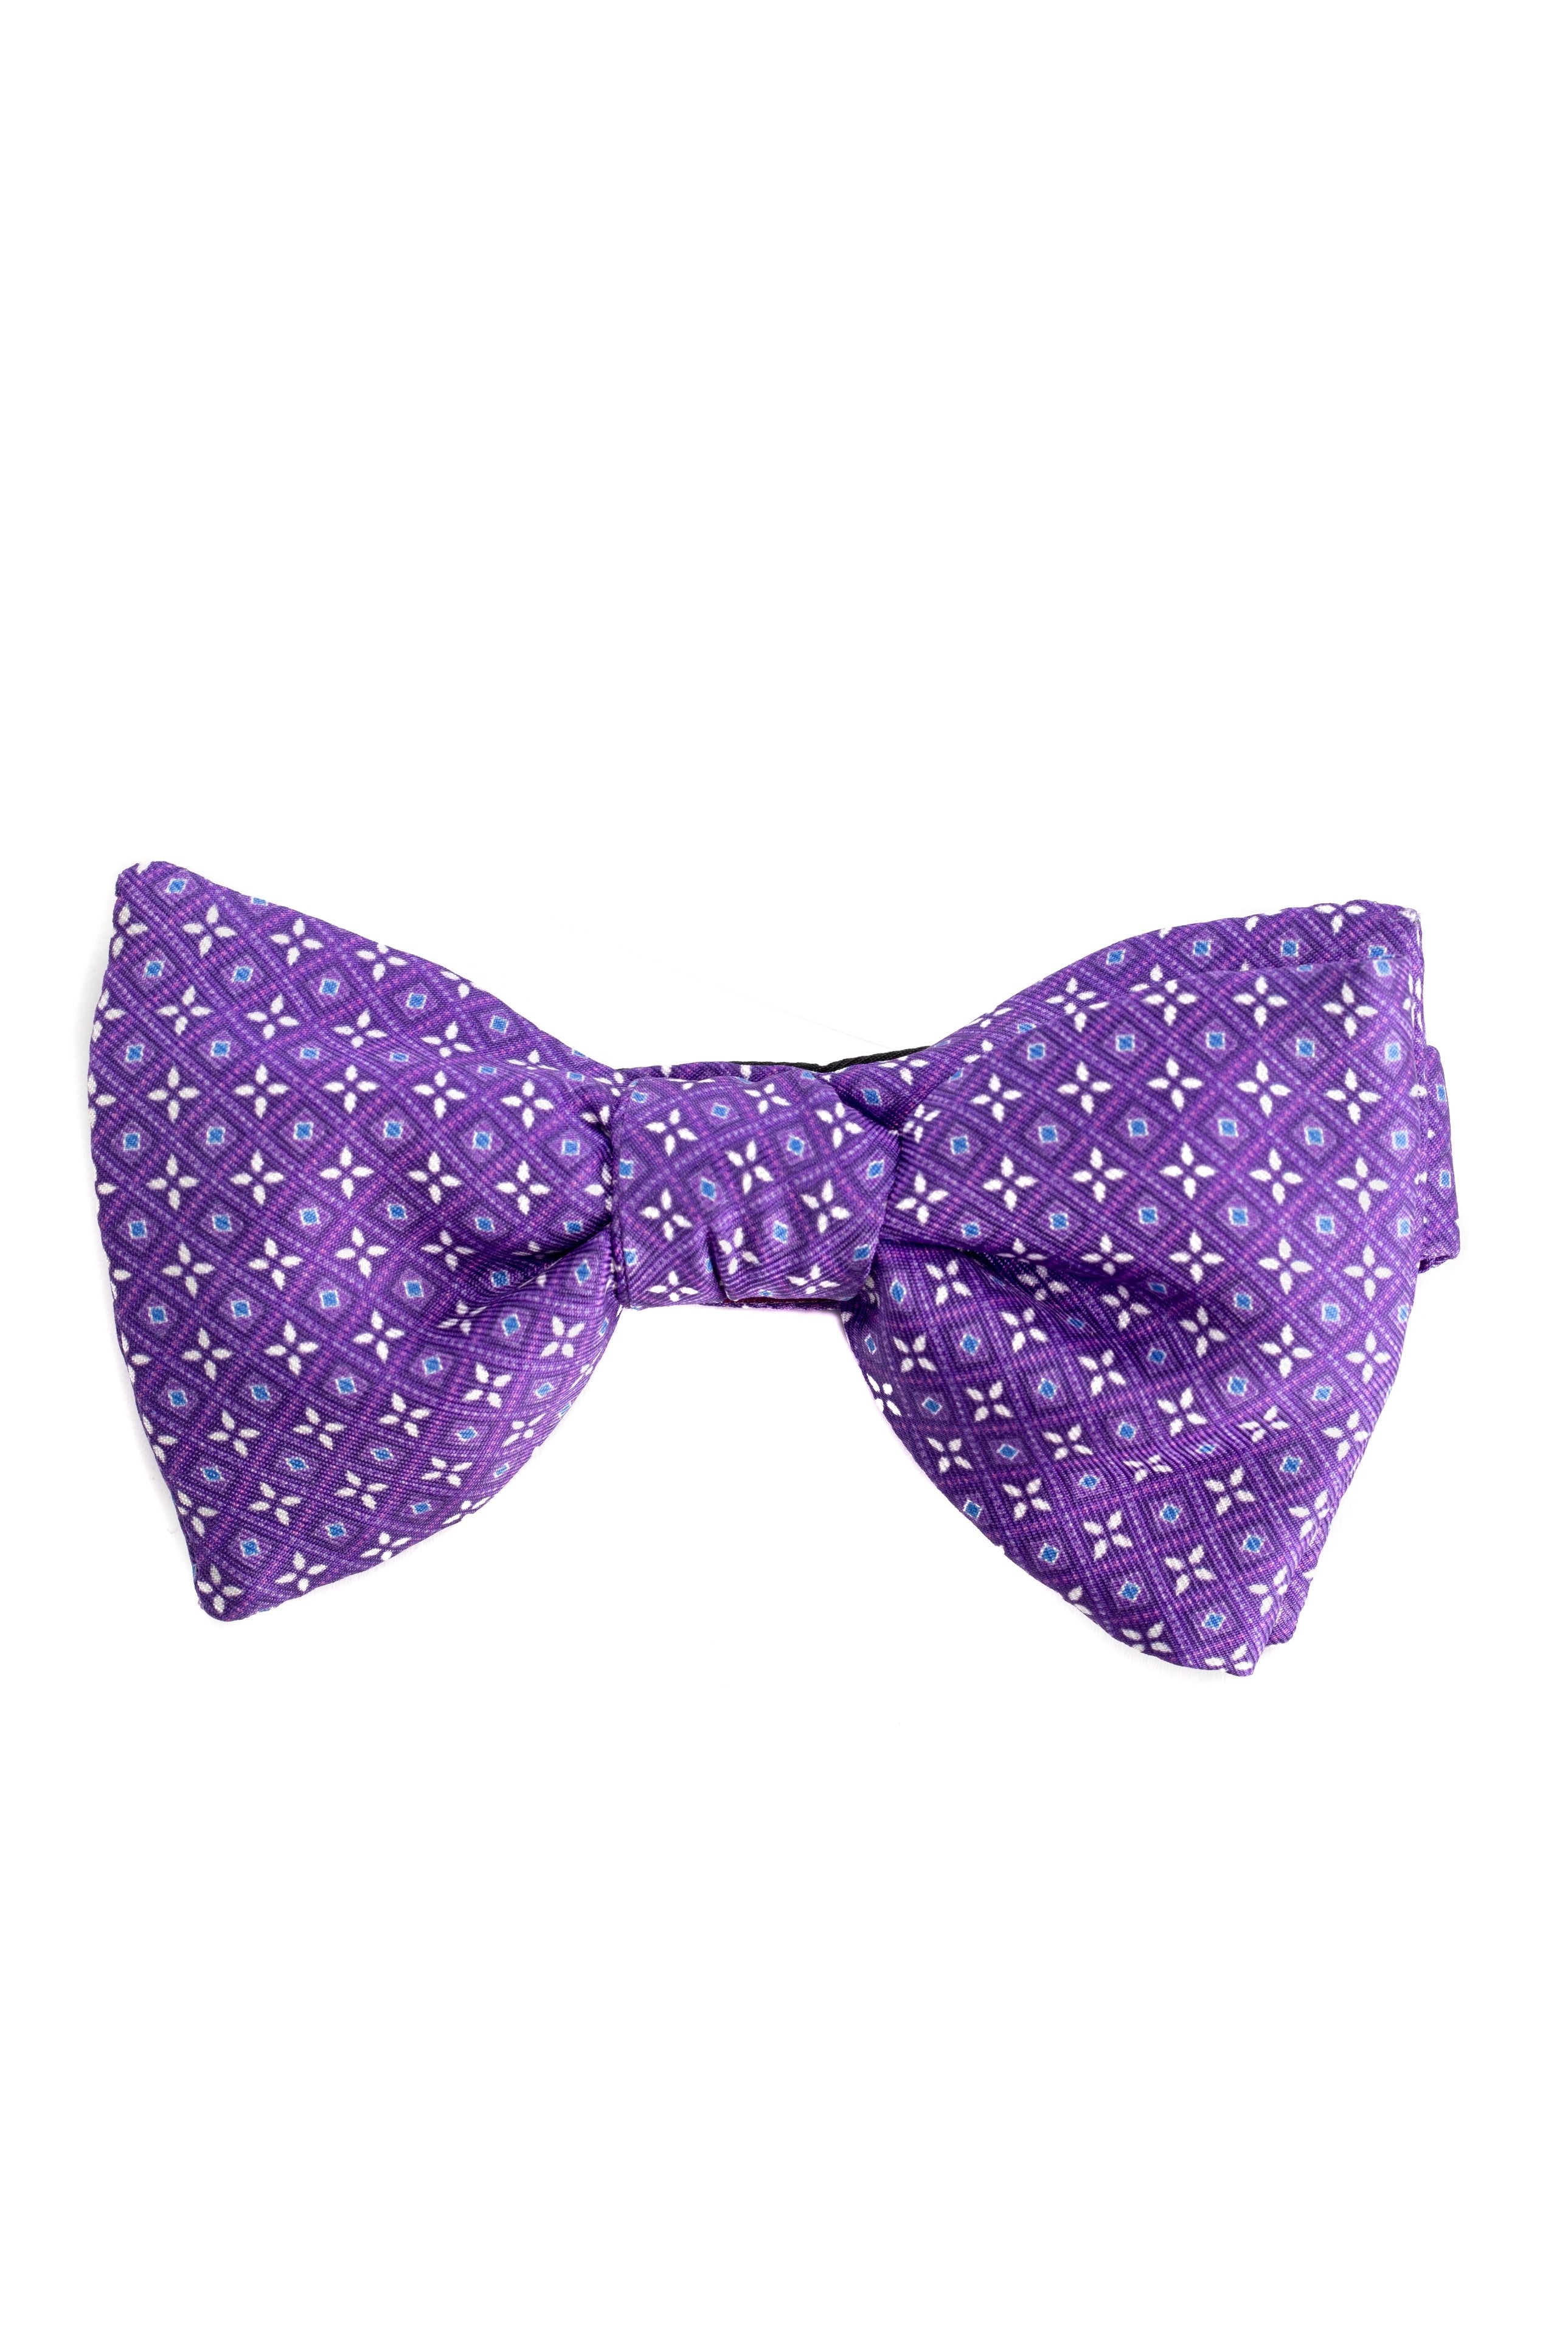 Purple Bow Tie With Floral Pattern